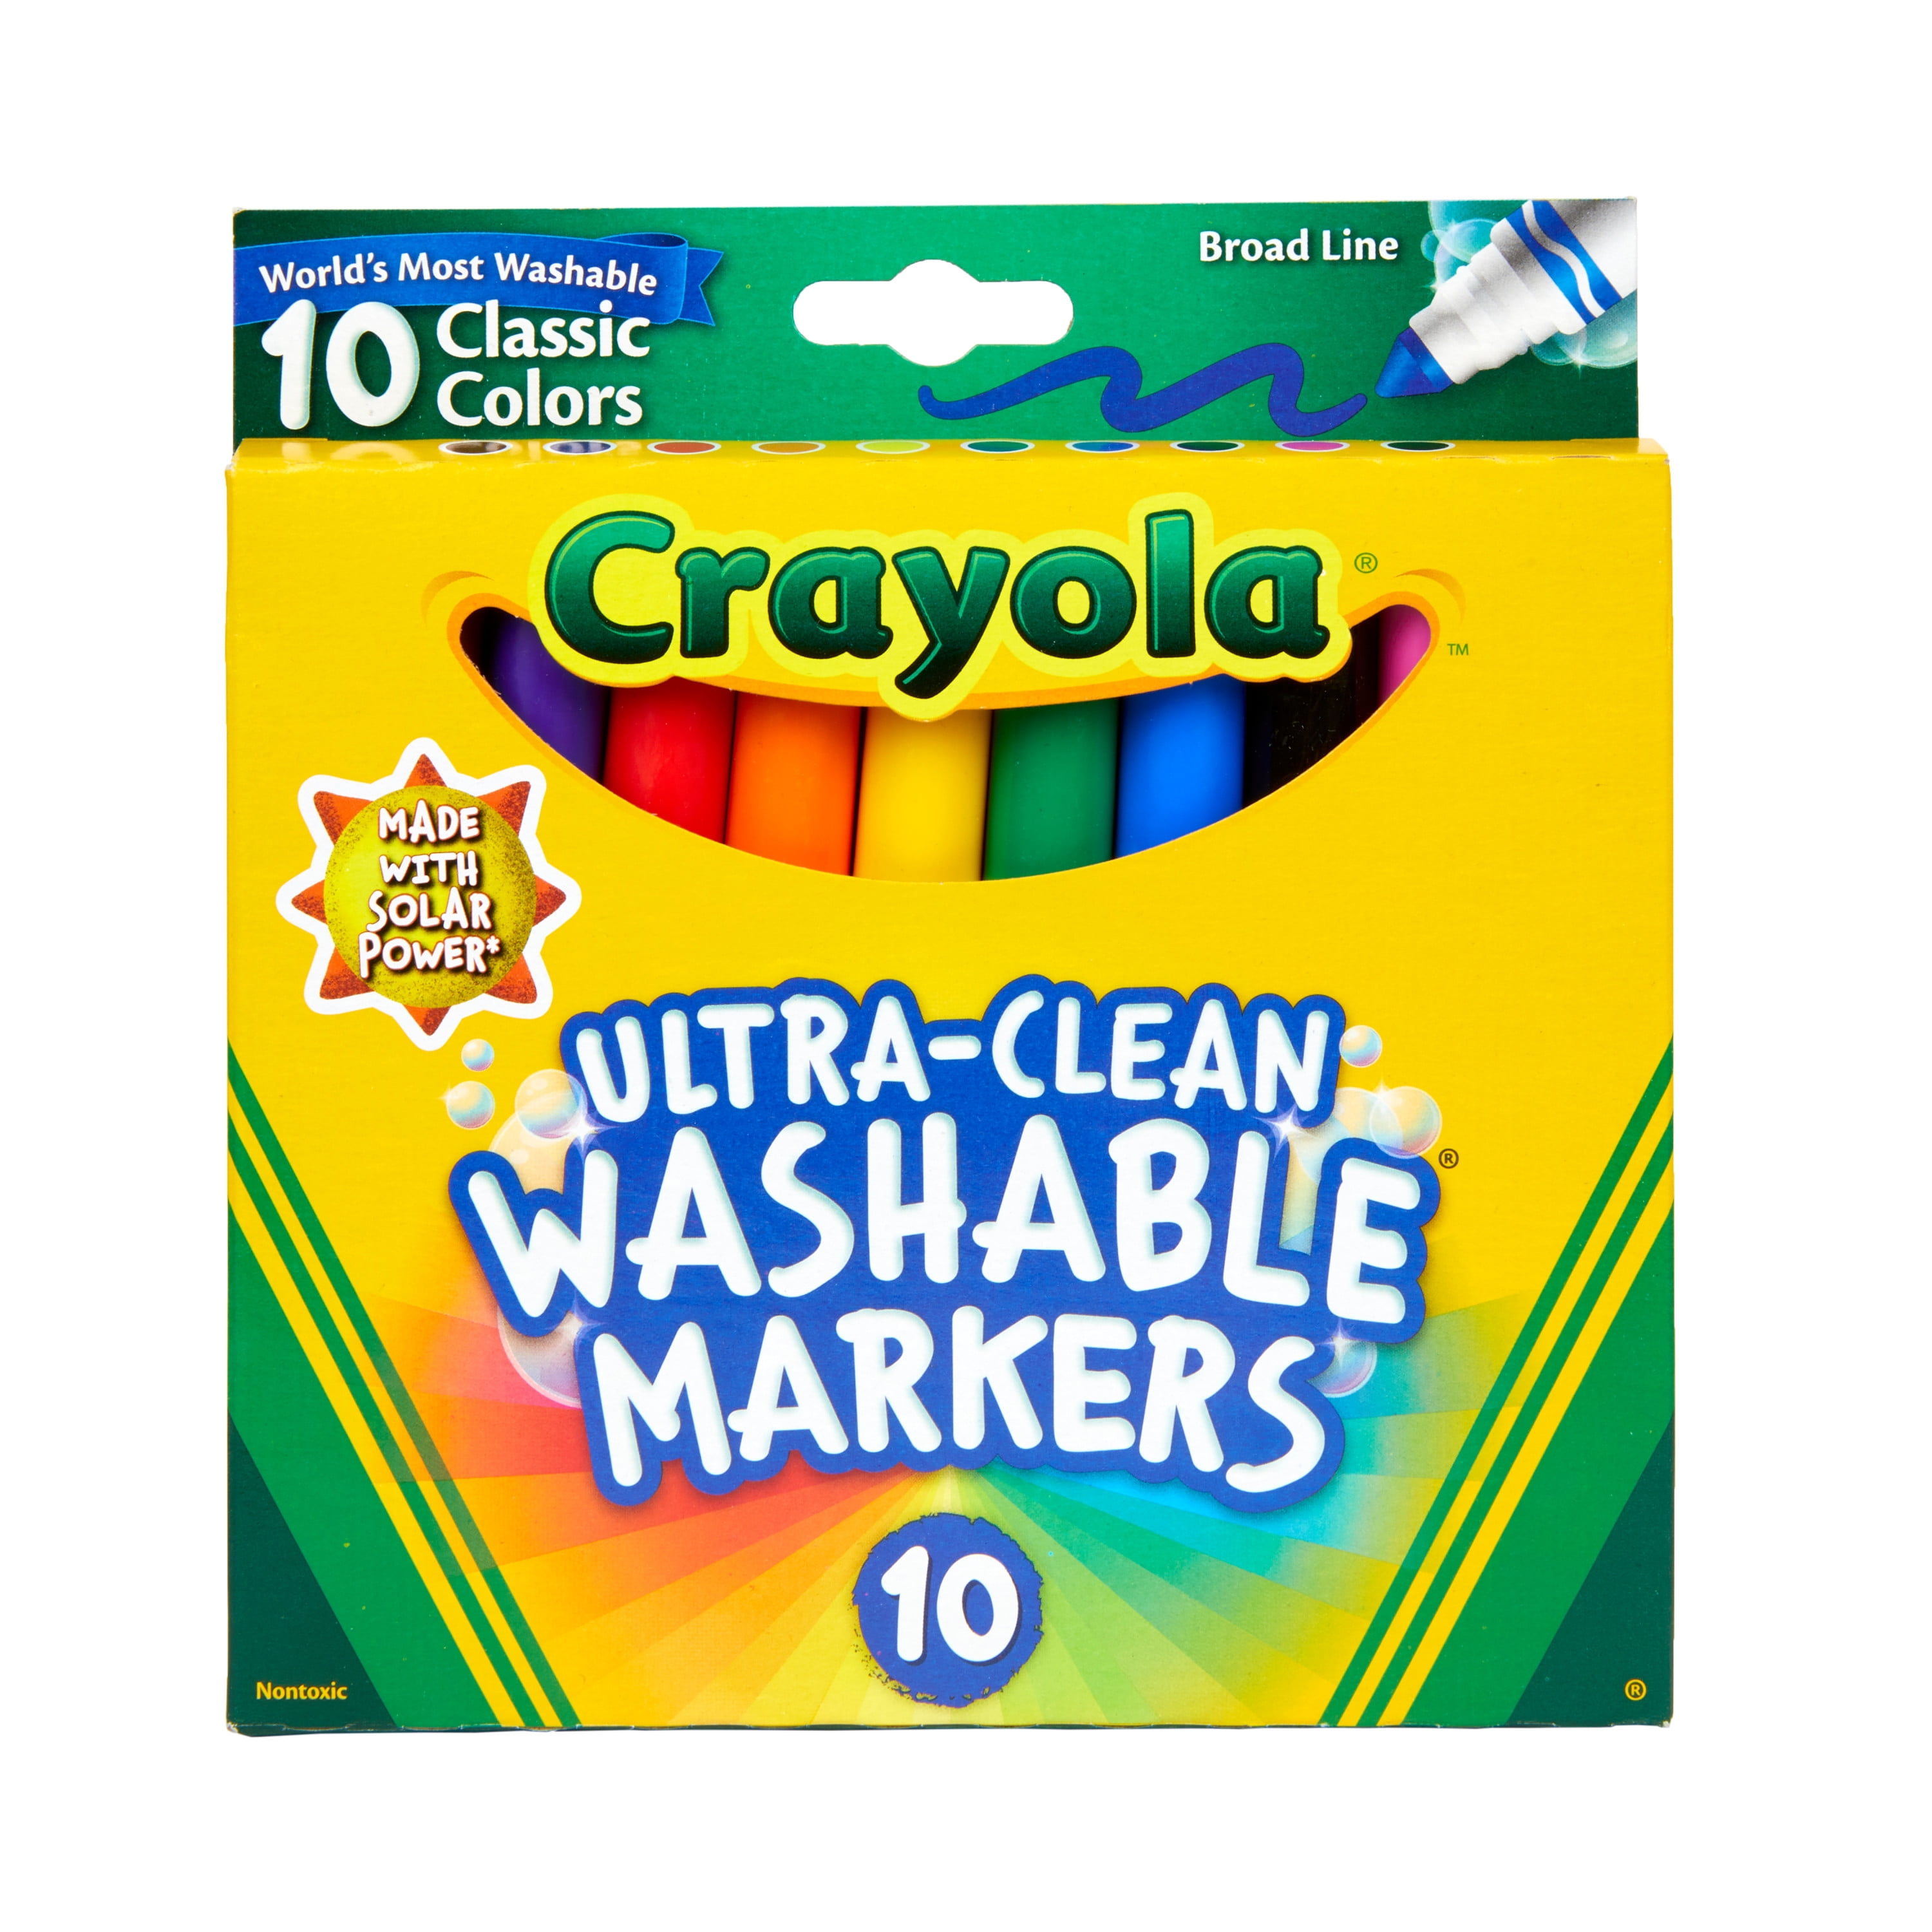 Washable Super Tip Markers, 10ct feature a durable concial tip